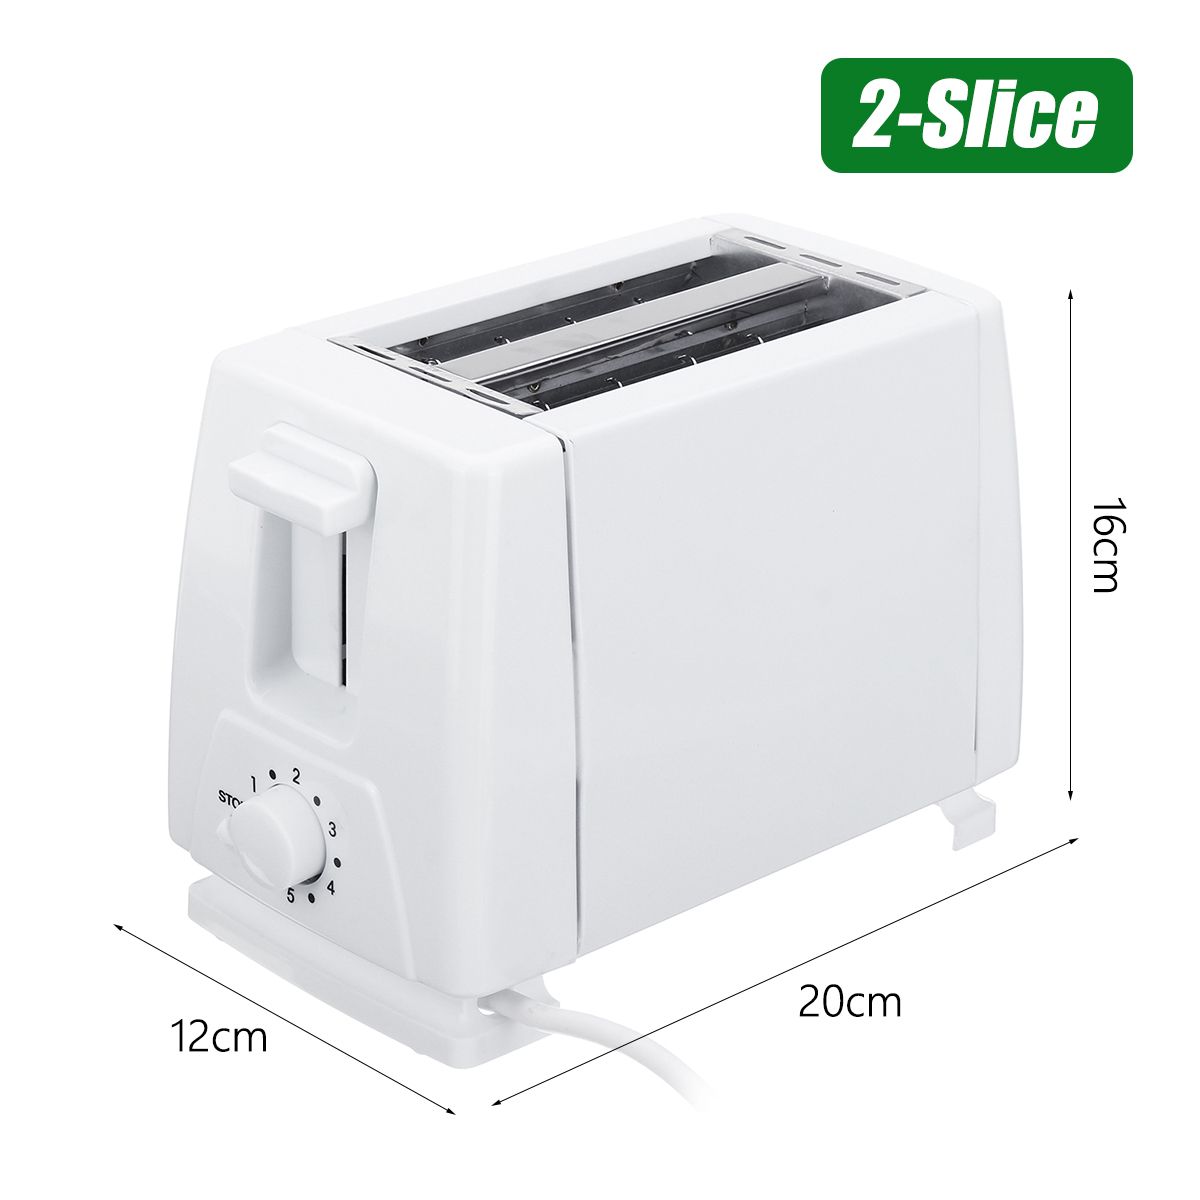 110-220V-24-Slices-Electric-Automatic-Toaster-Stainless-Bread-Maker-Extra-Wide-Slot-with-Crumb-Tray-1638795